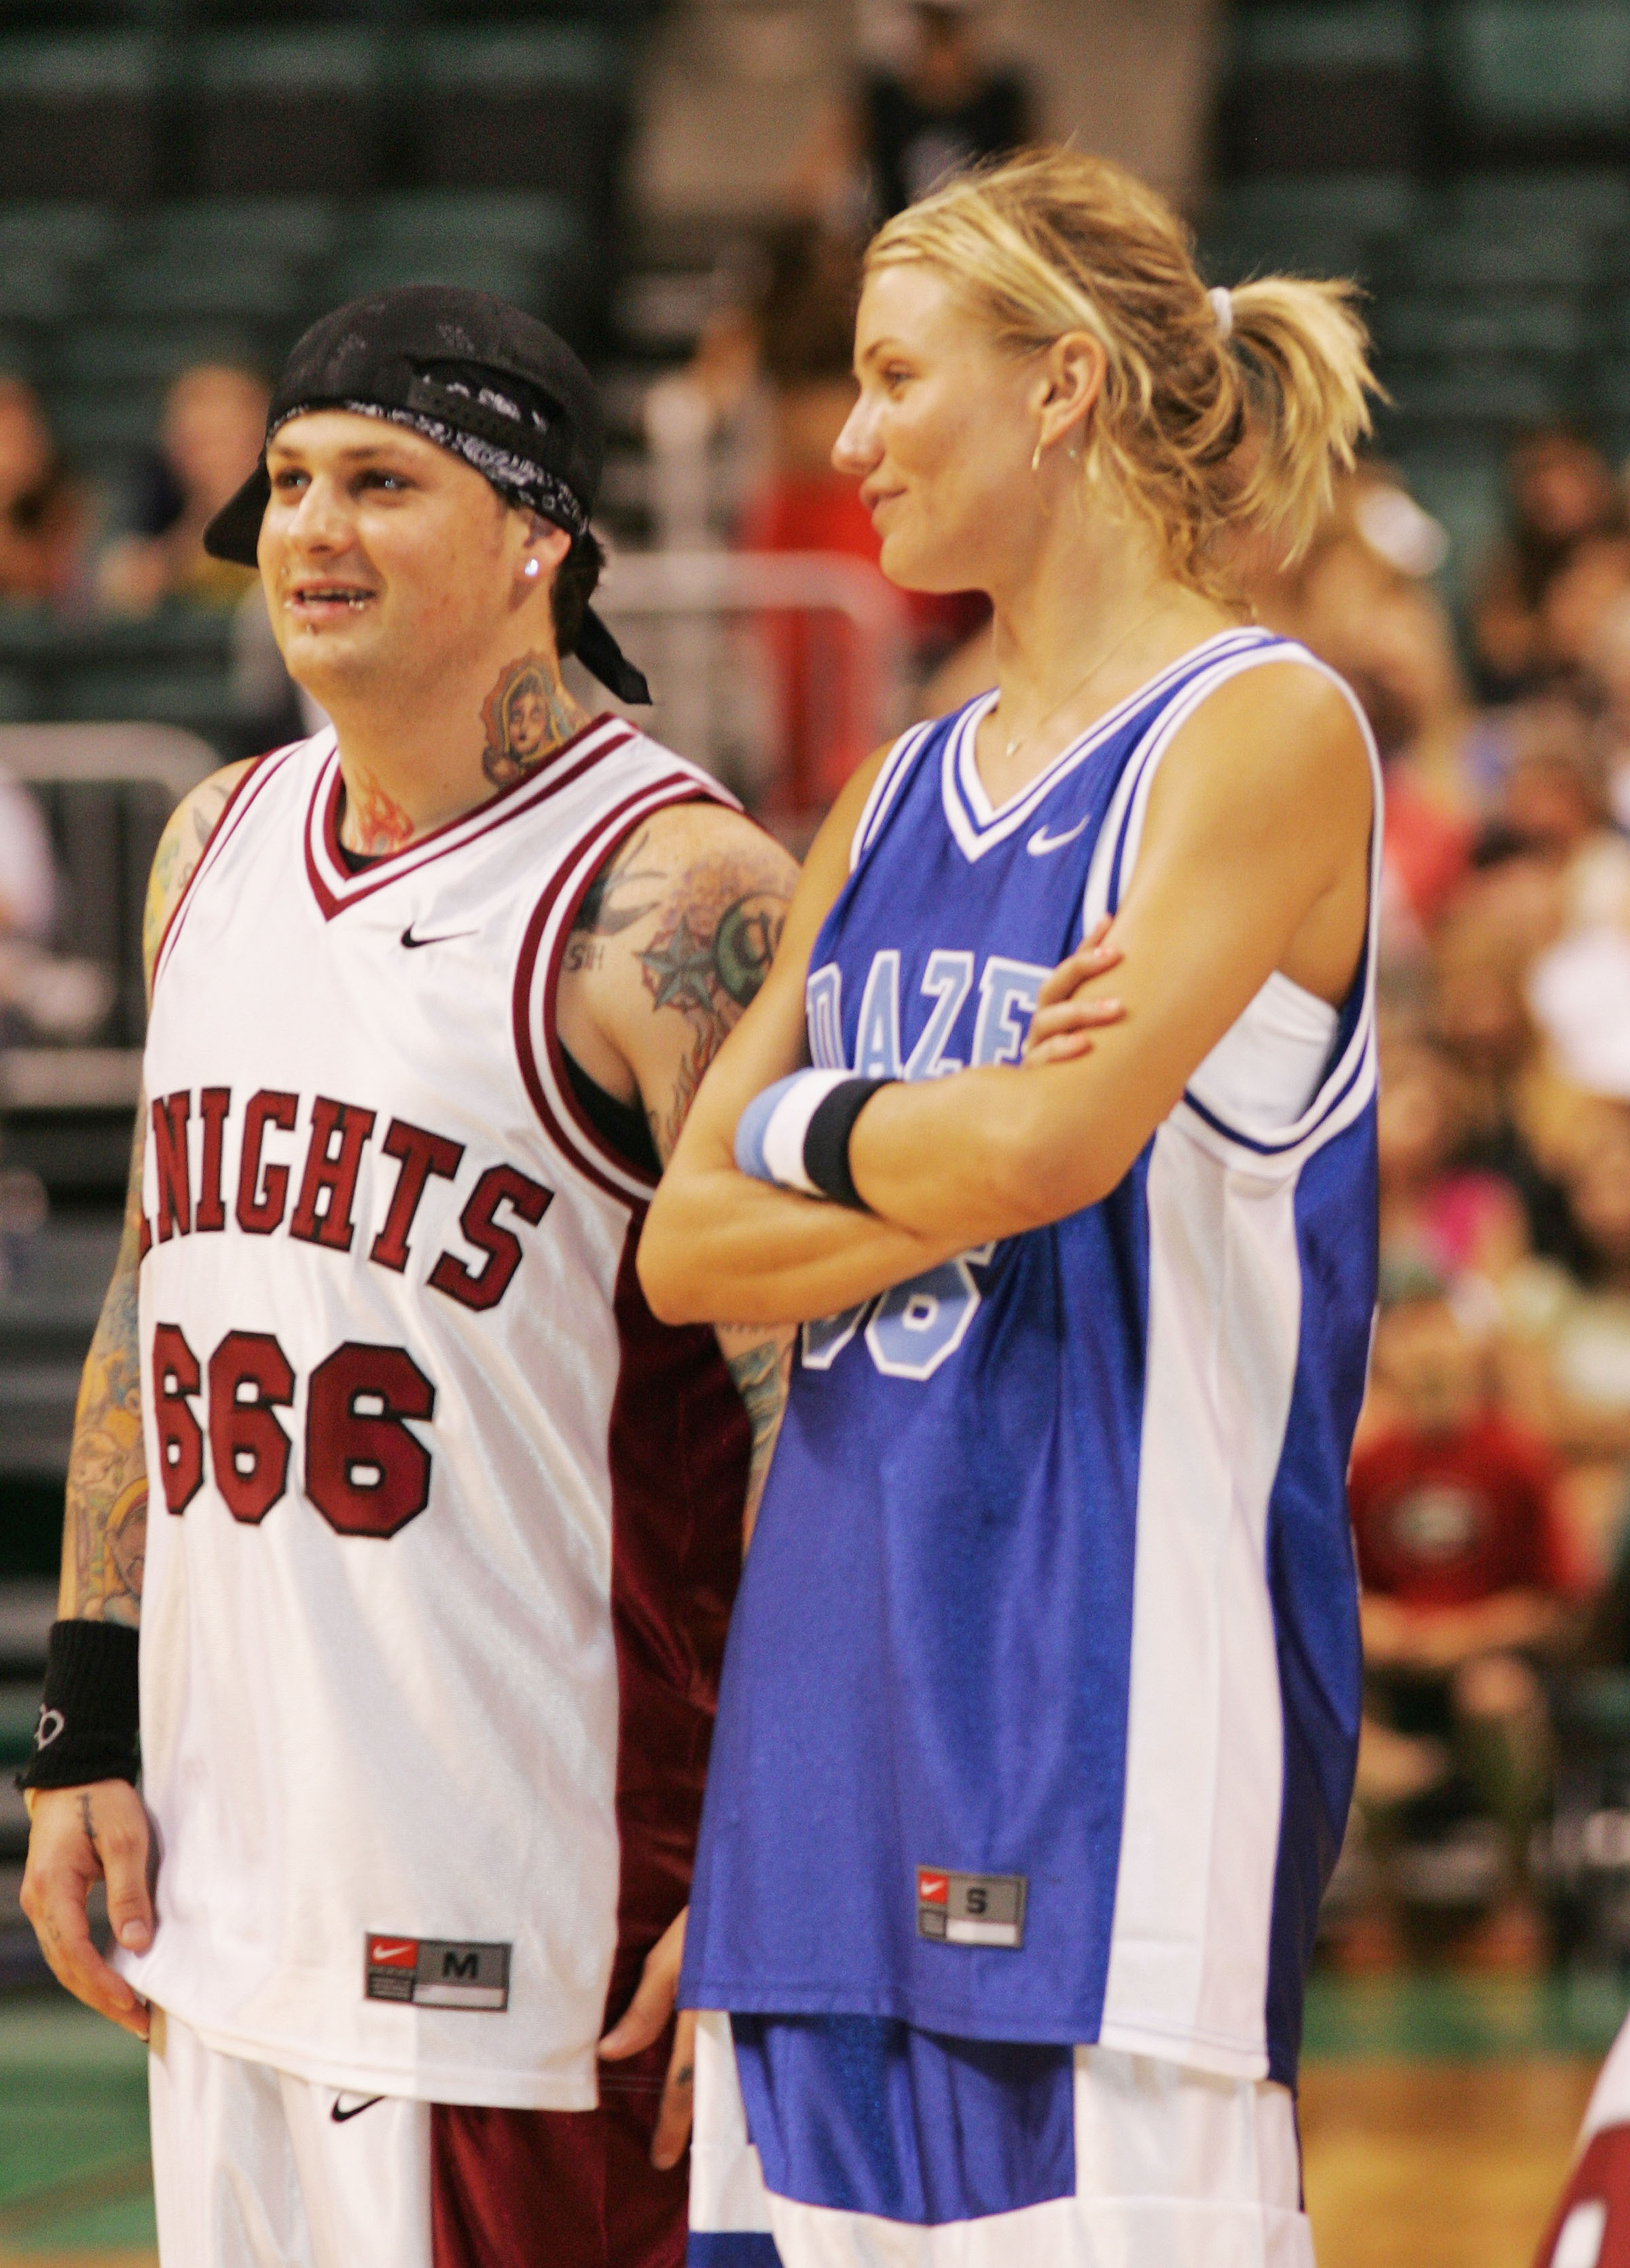 Benji Madden and Cameron Diaz attend the NSYNC Challenge For The Children Celebrity Basketball Game in Sunrise, Florida on July 25, 2004 | Source: Getty Images